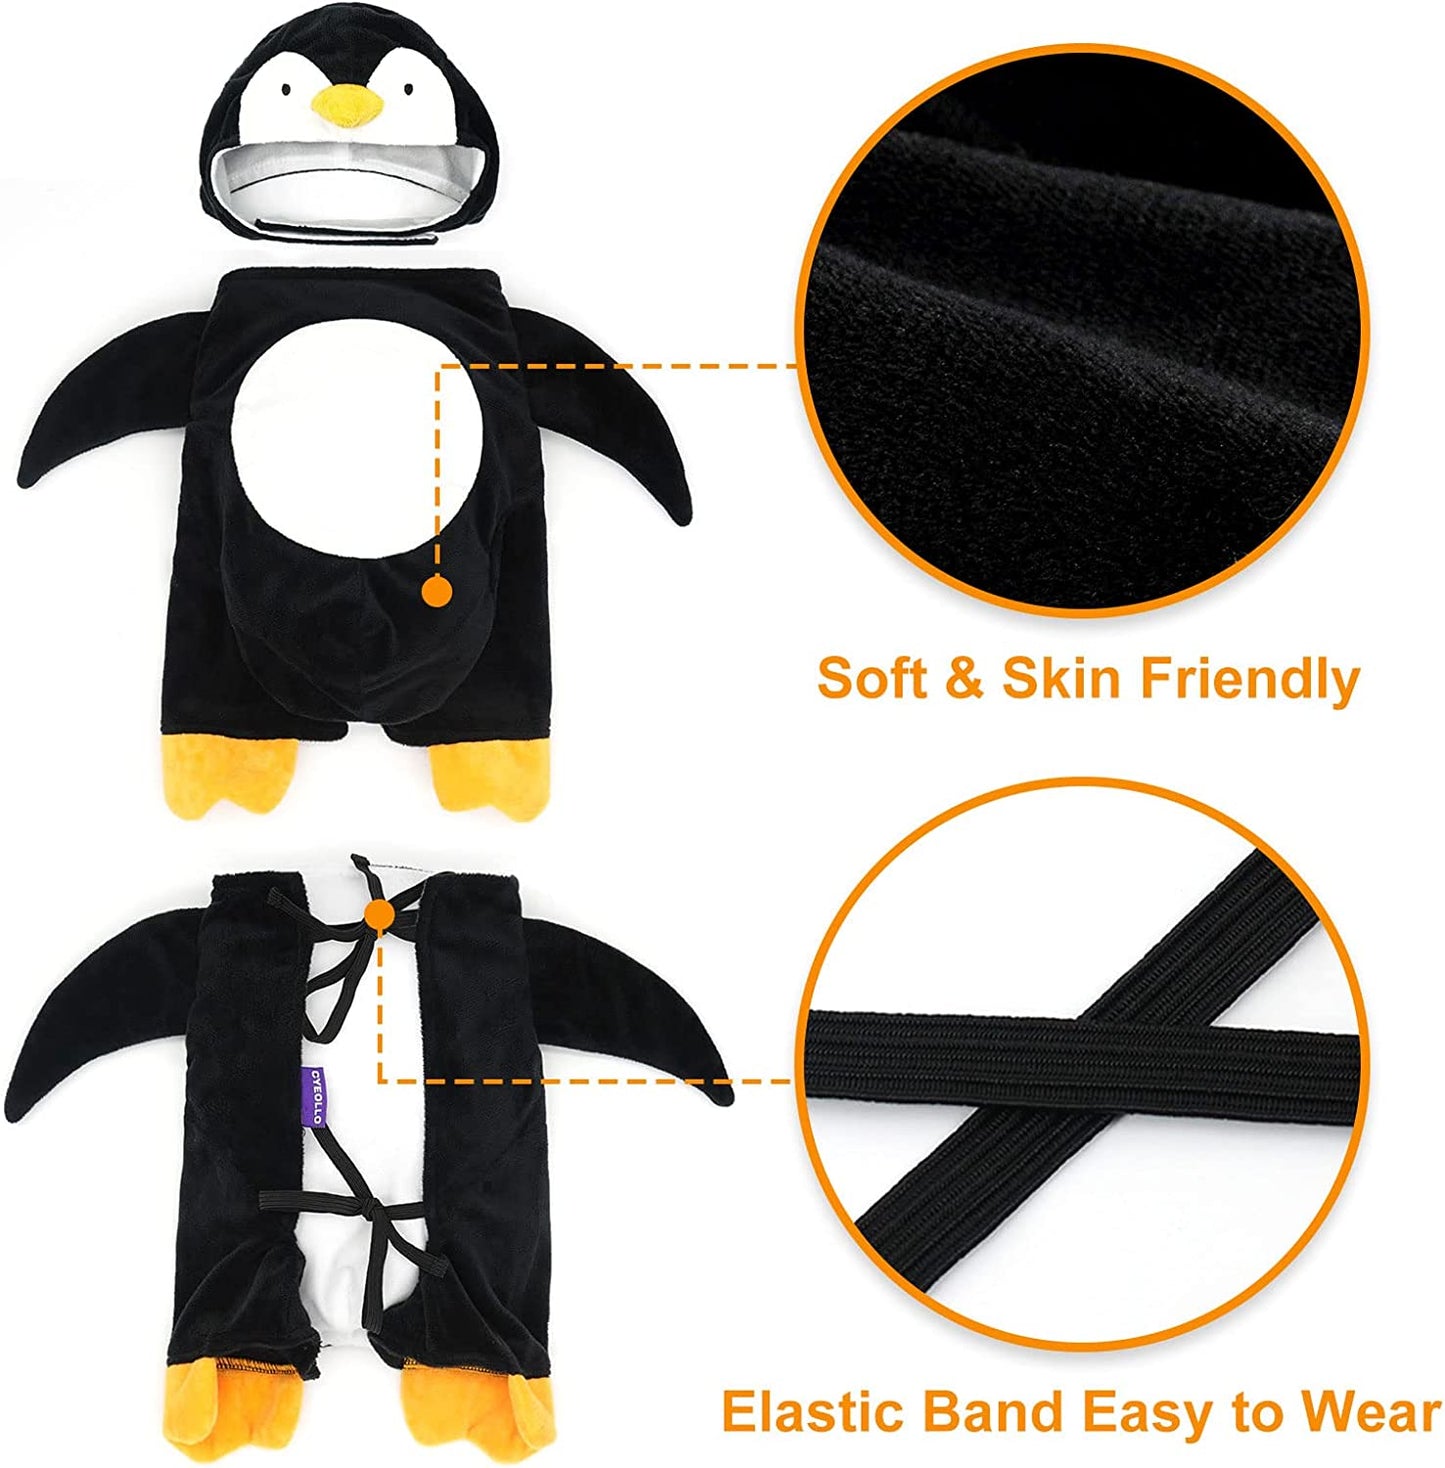 Cyeollo Dog Costume Cute Penguin Dog Cosplay Puppy Funny Halloween Costumes Party Special Clothes for Small Dogs Animals & Pet Supplies > Pet Supplies > Dog Supplies > Dog Apparel cyeollo   